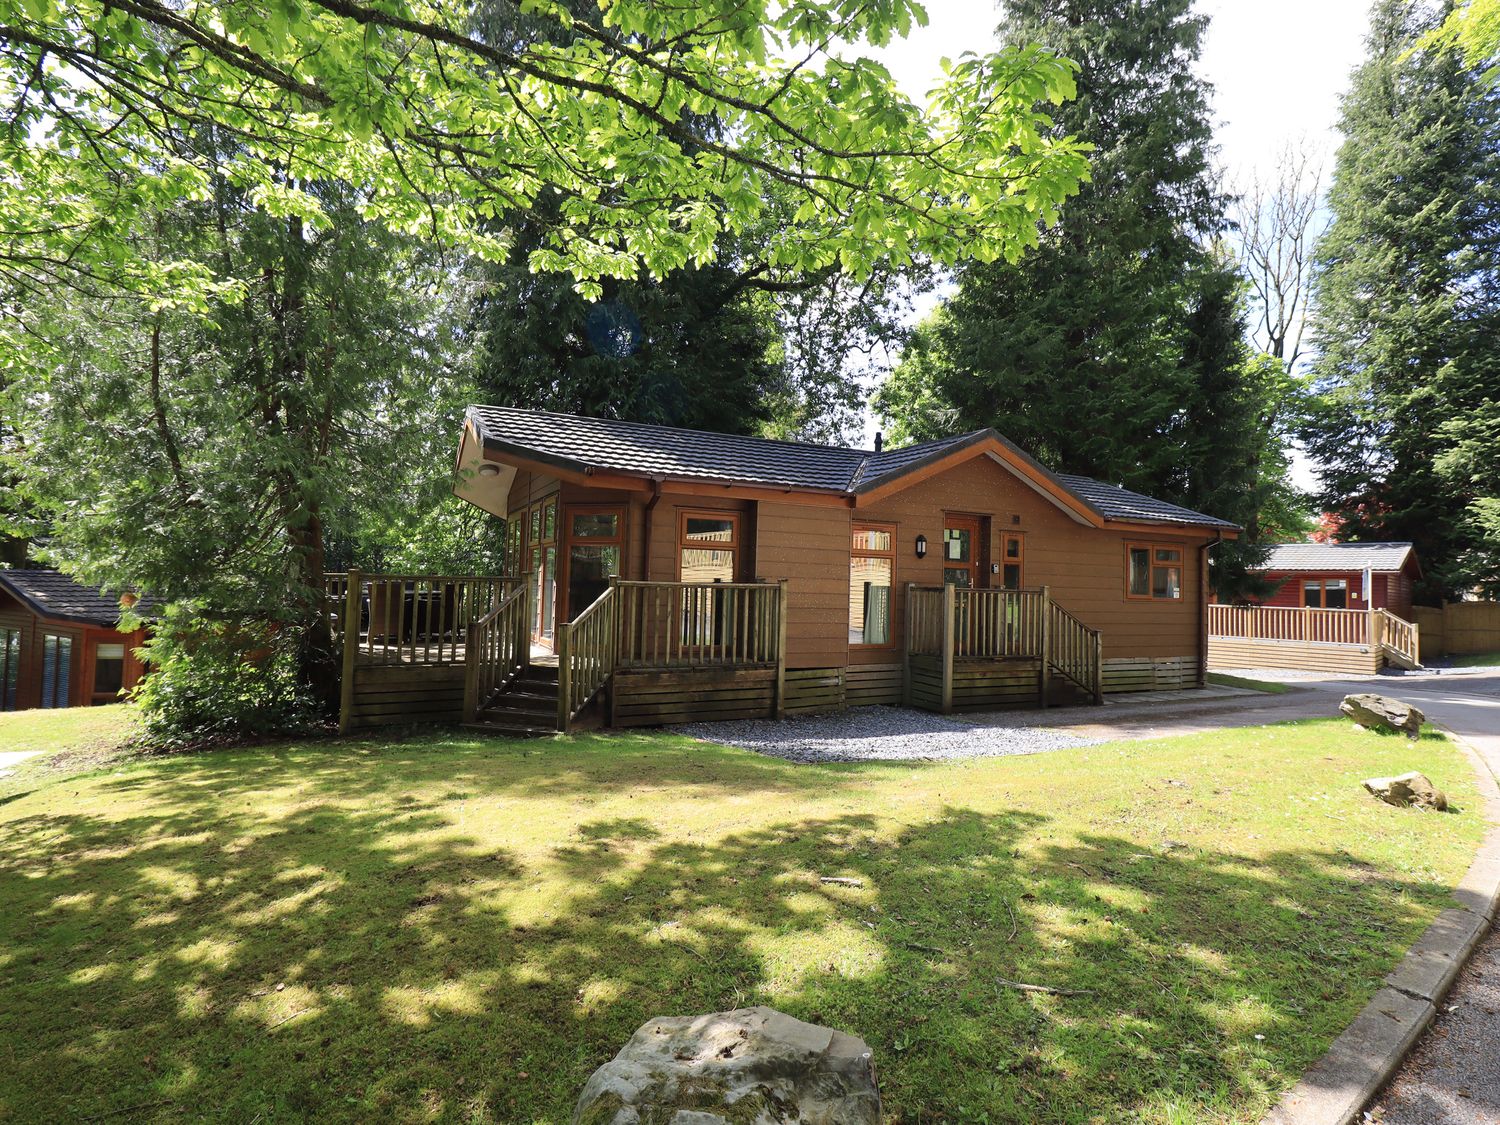 Forest Pines Lodge - Lake District - 1068844 - photo 1